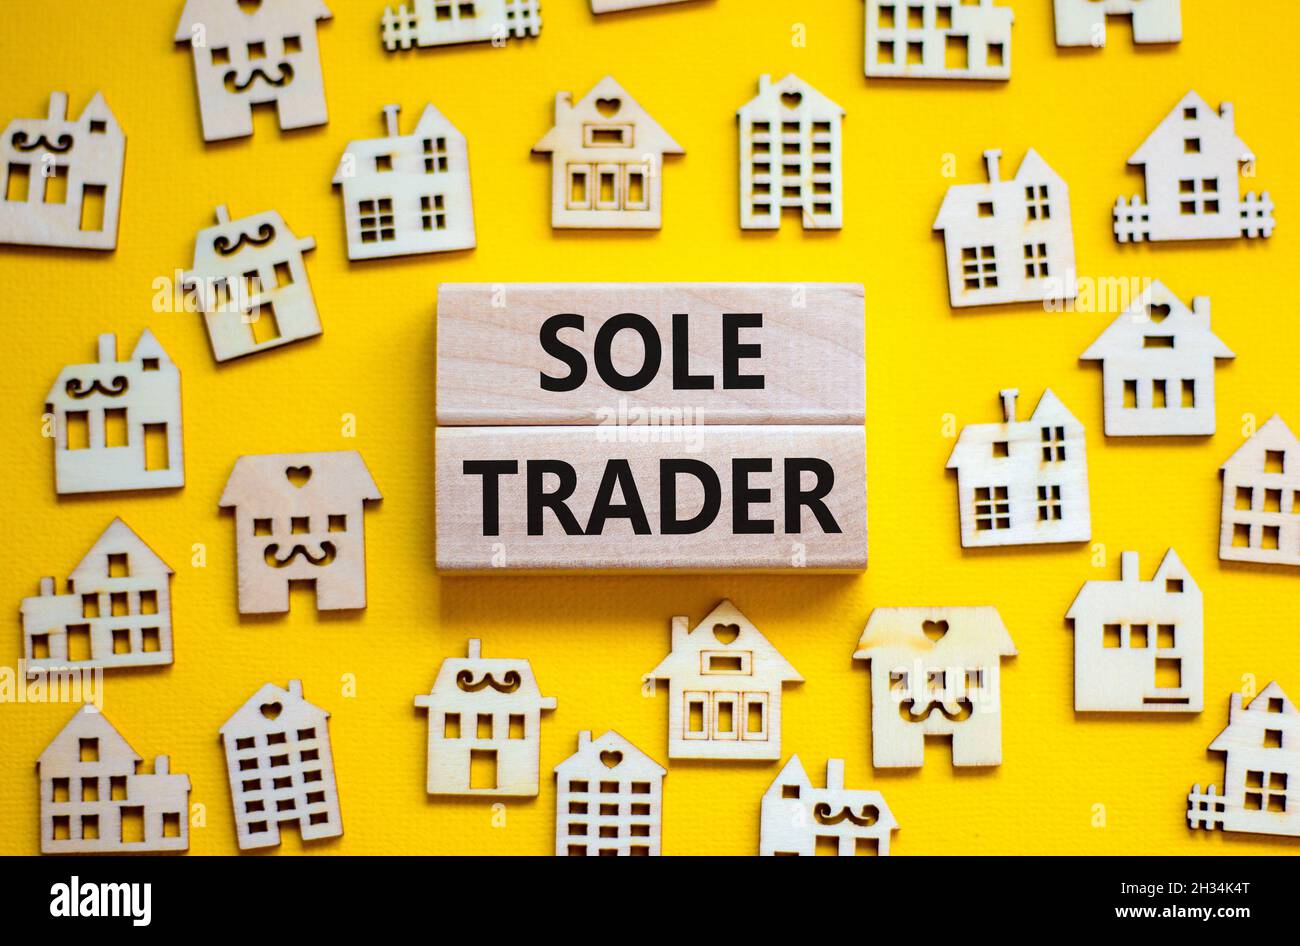 Sole trader symbol. Concept words 'Sole trader' on wooden blocks near miniature wooden houses. Beautiful yellow background. Business, sole trader conc Stock Photo